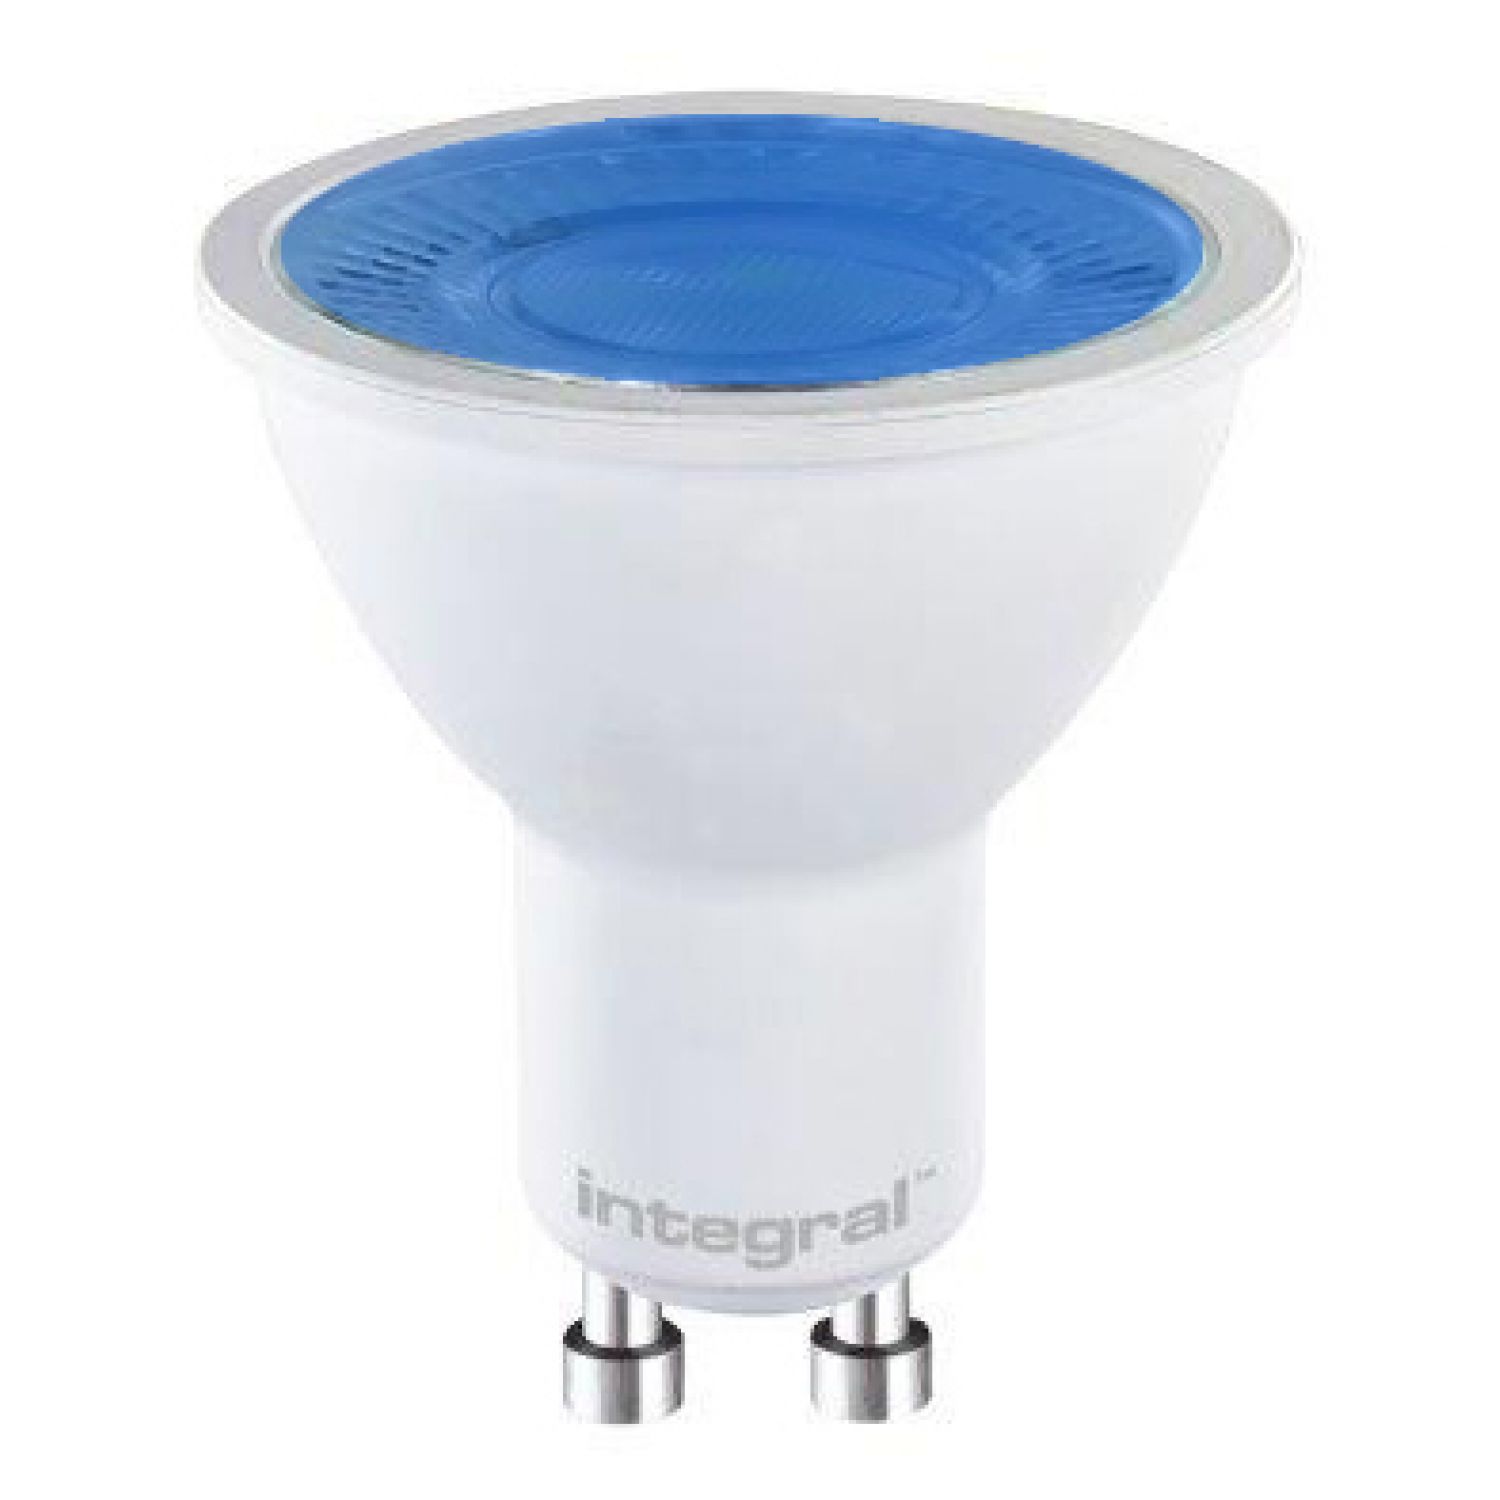 Integral 5w LED GU10 Bulb, blue, non dimmable, 60lm, 40° - from £2.02